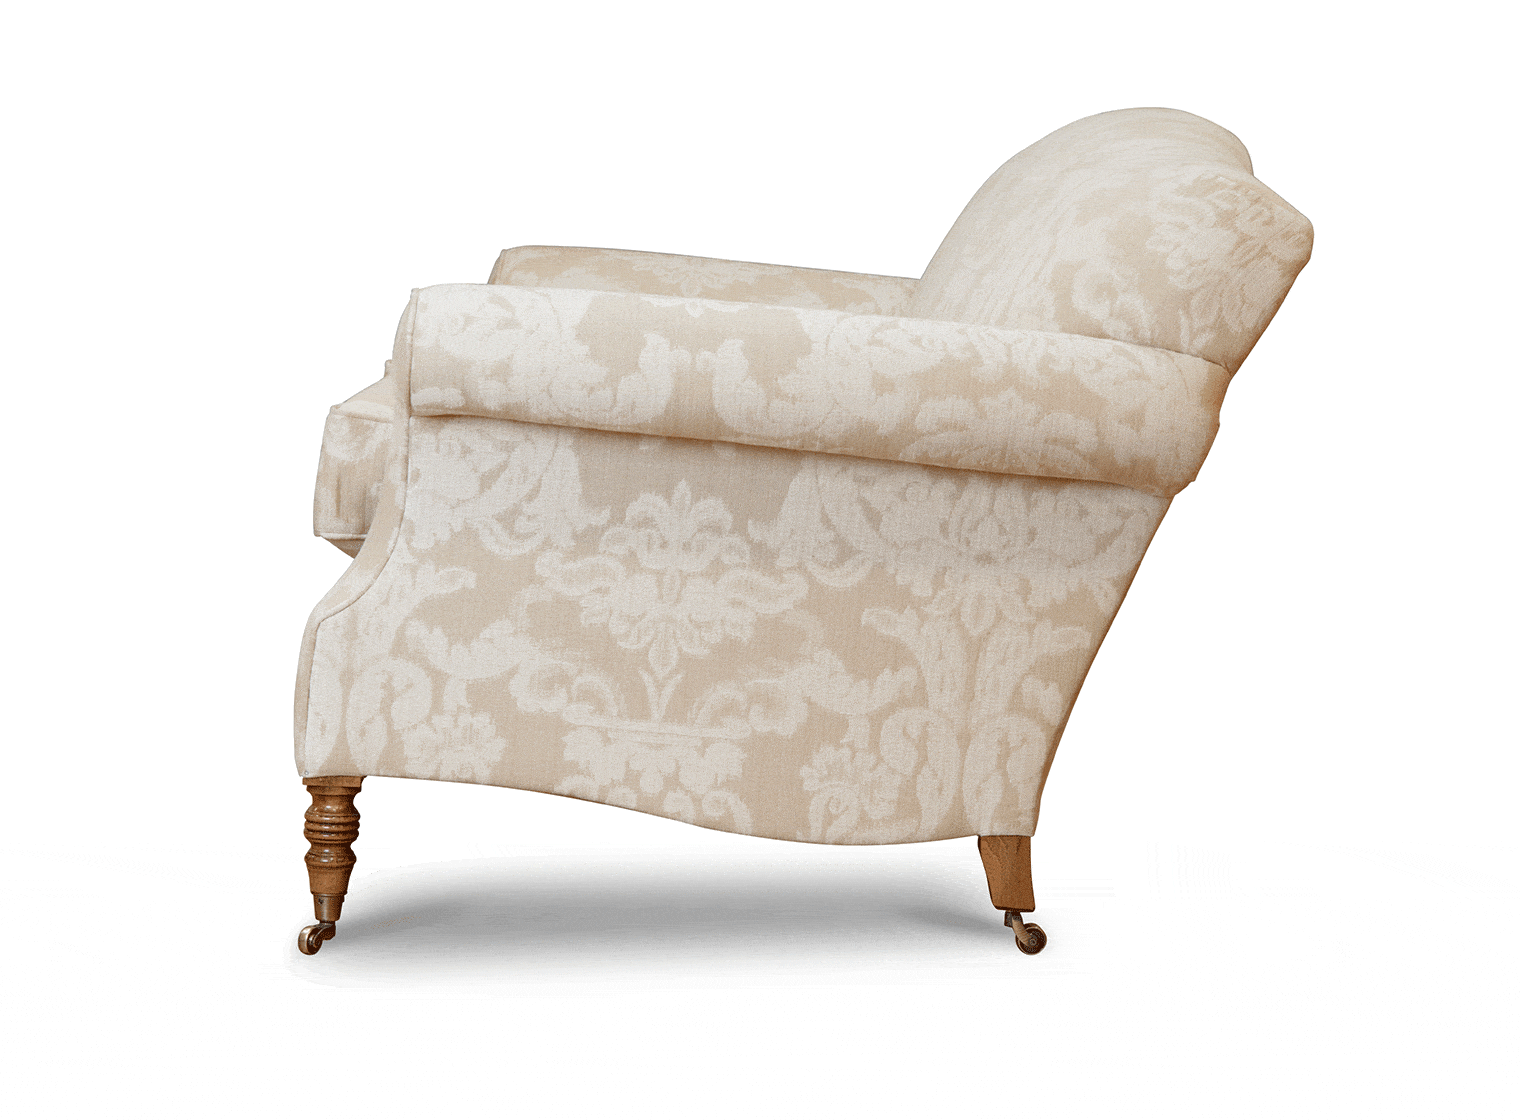 Boswell 2.5 seater sofa in Wicklow damask - Oatmeal - Beaumont & Fletcher